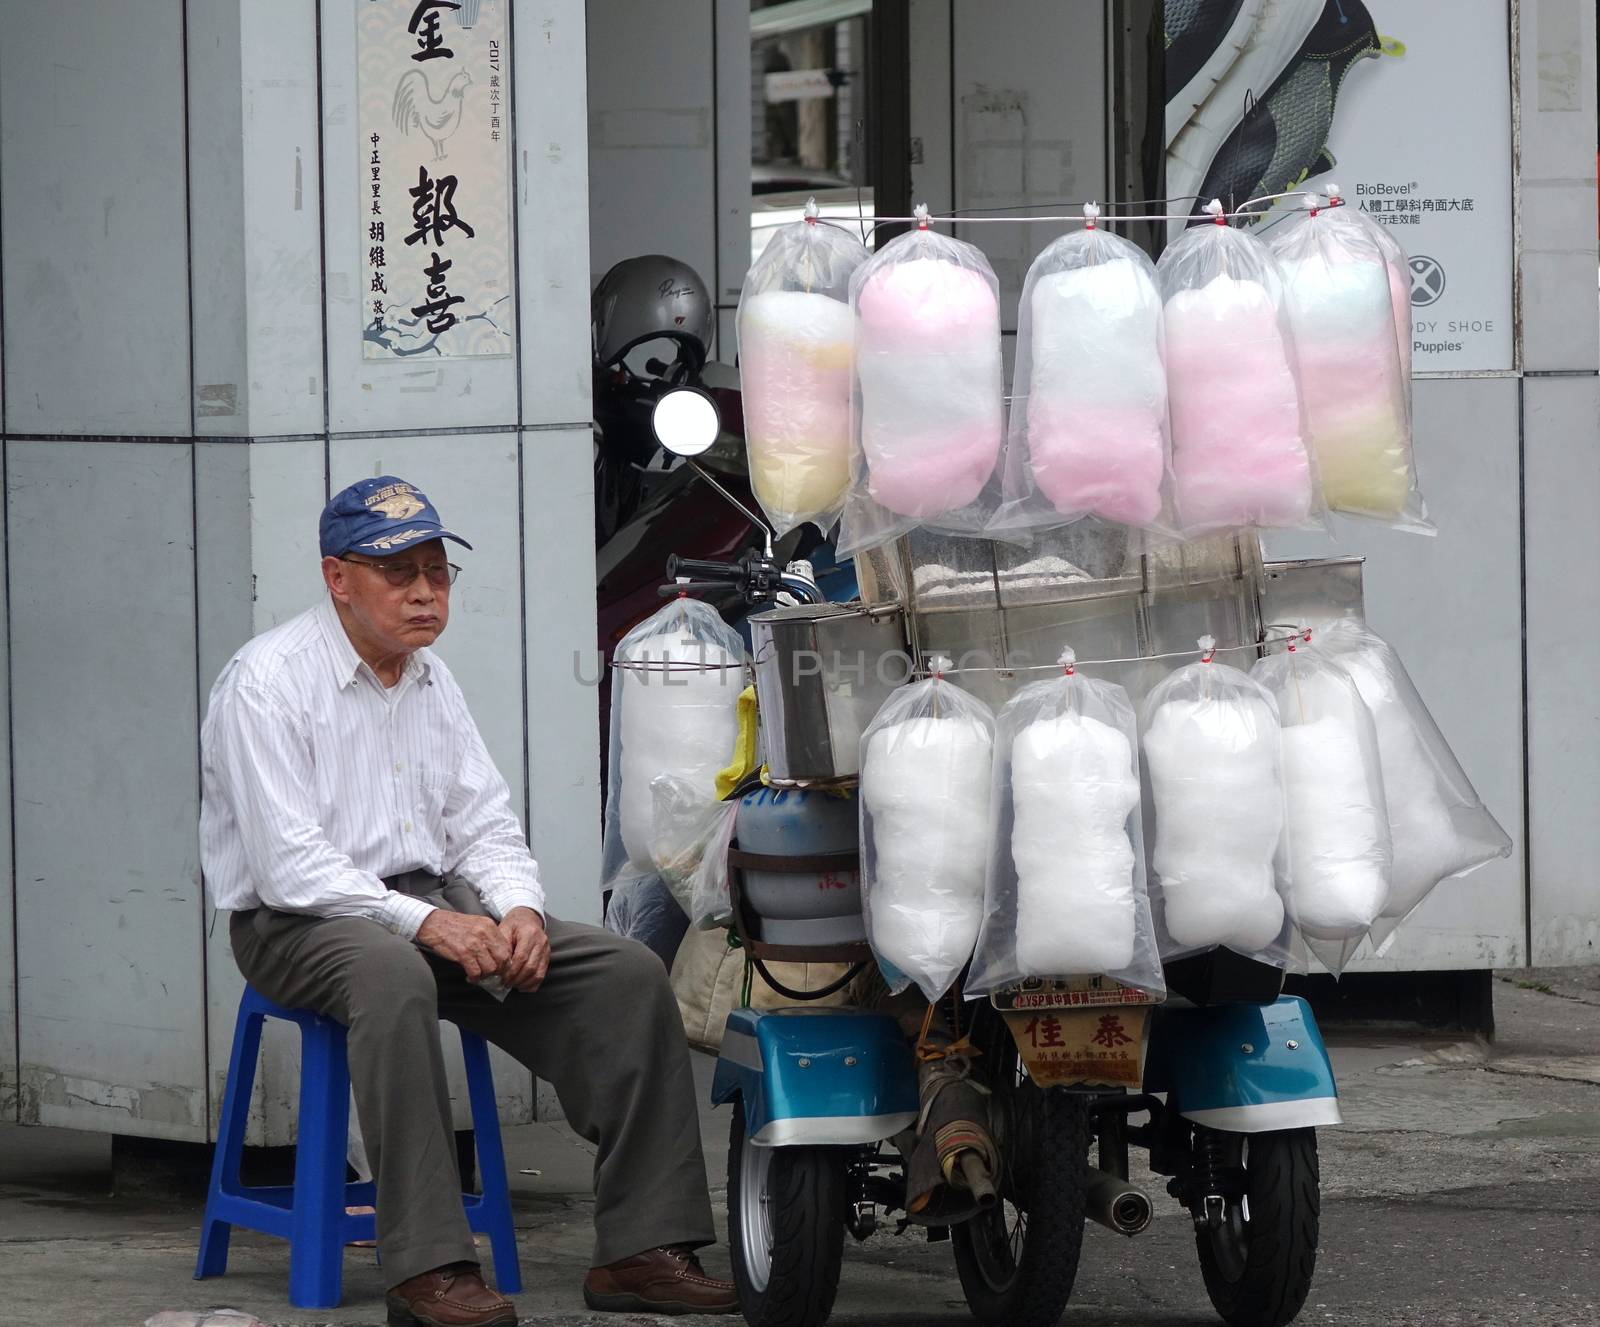 Selling Candy Floss in Taiwan by shiyali